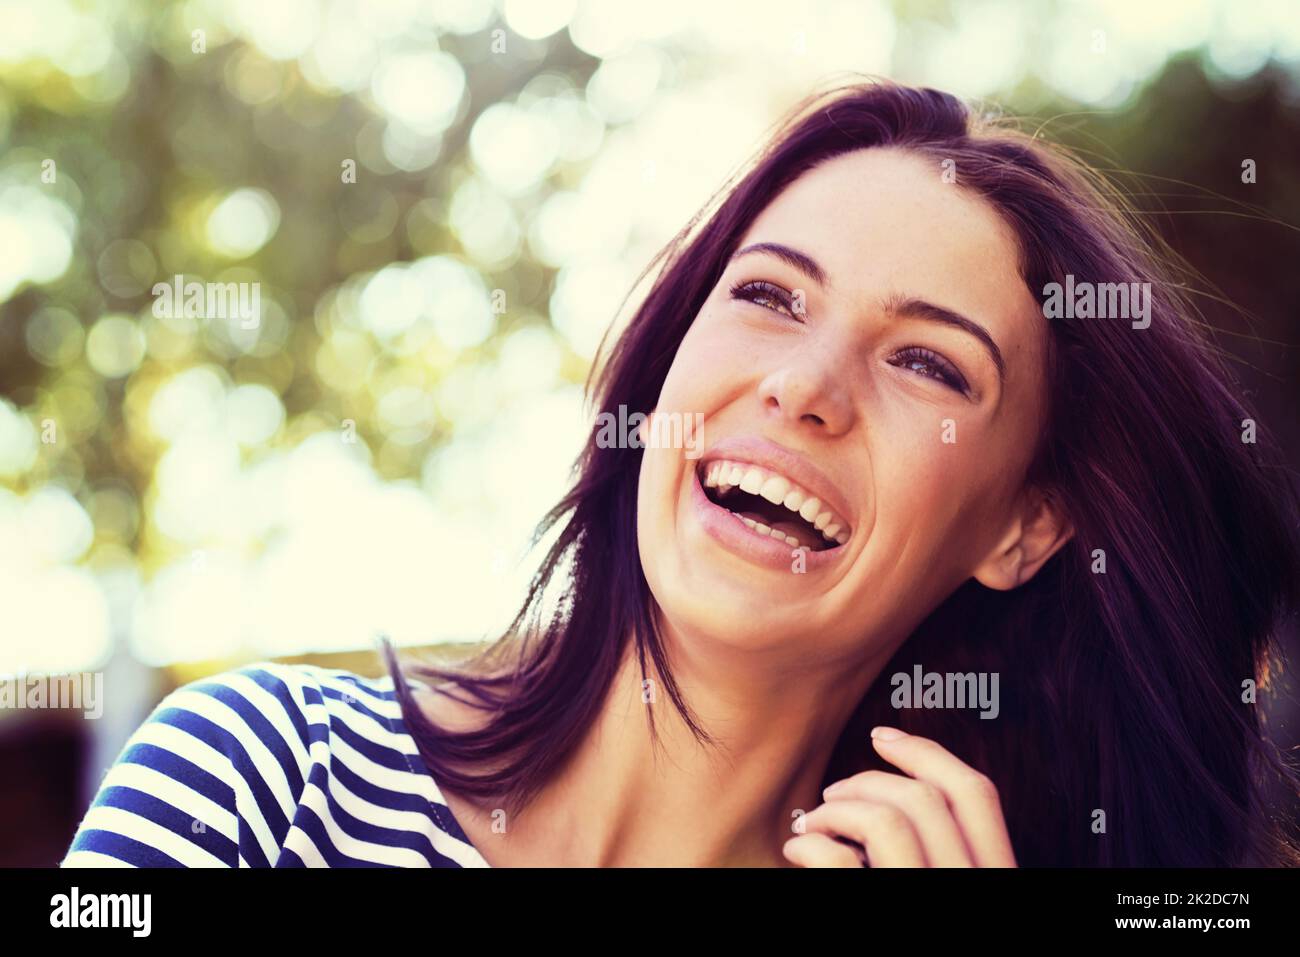 The picture of pure joy. Shot of a beautiful young woman laughing while standing outside. Stock Photo